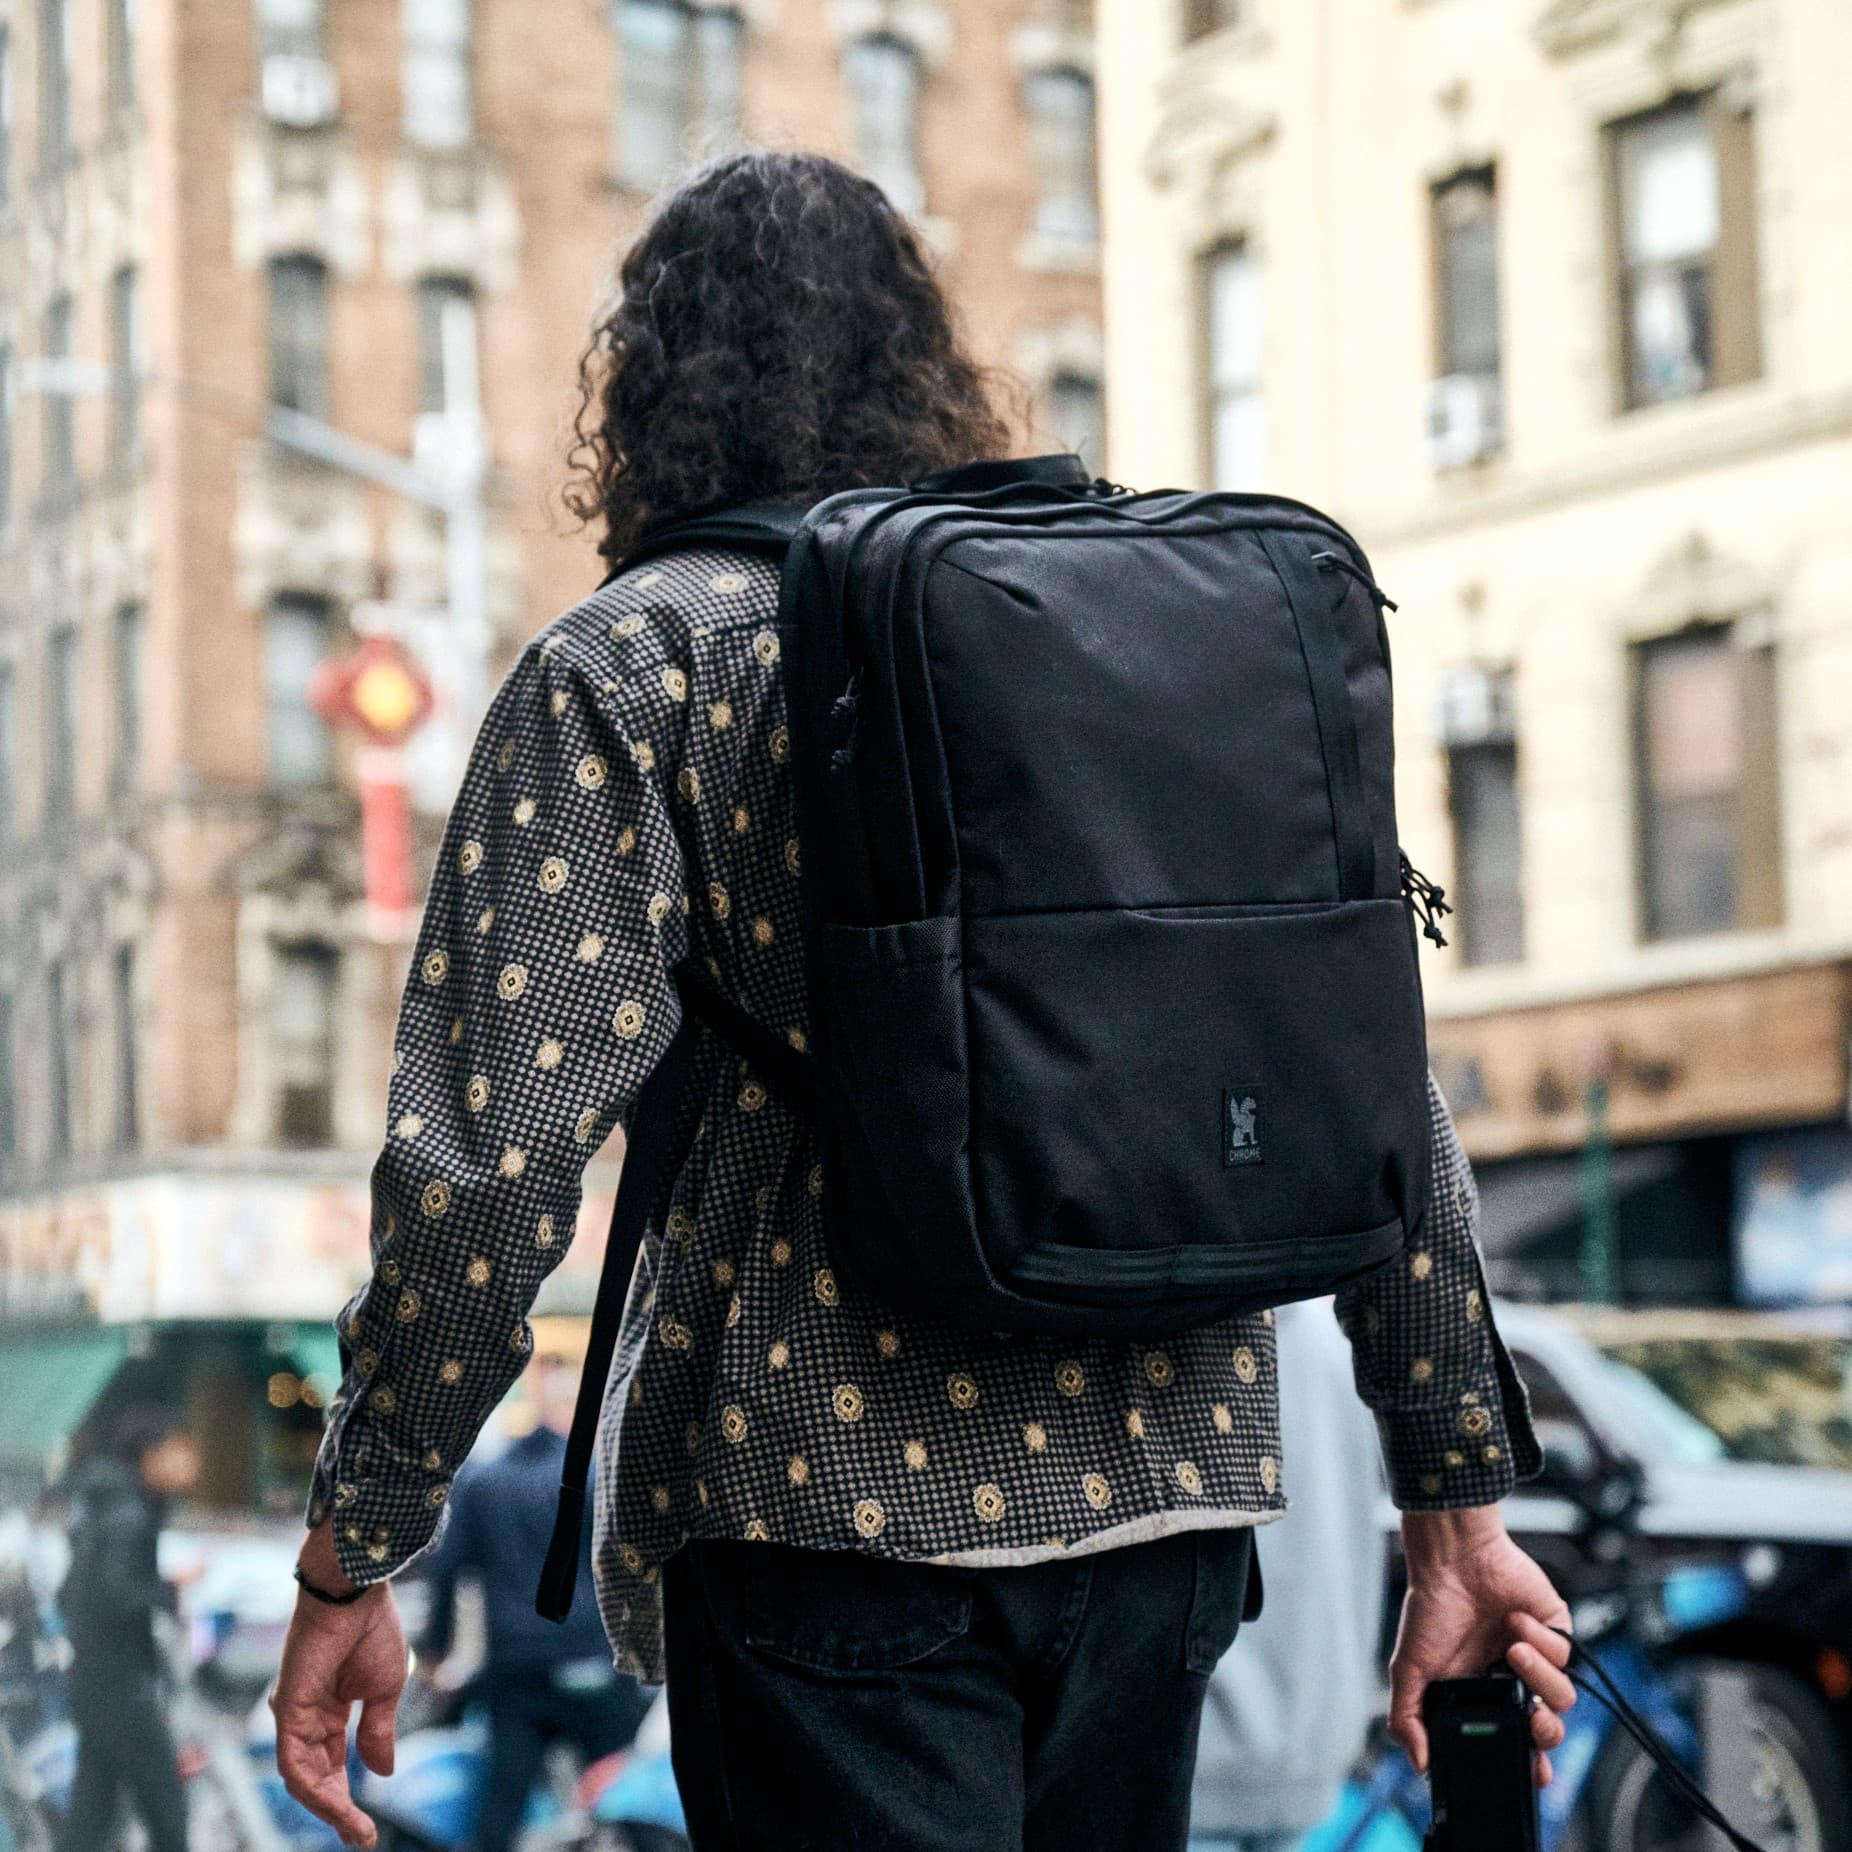 Hawes 26L Backpack worn by a person walking